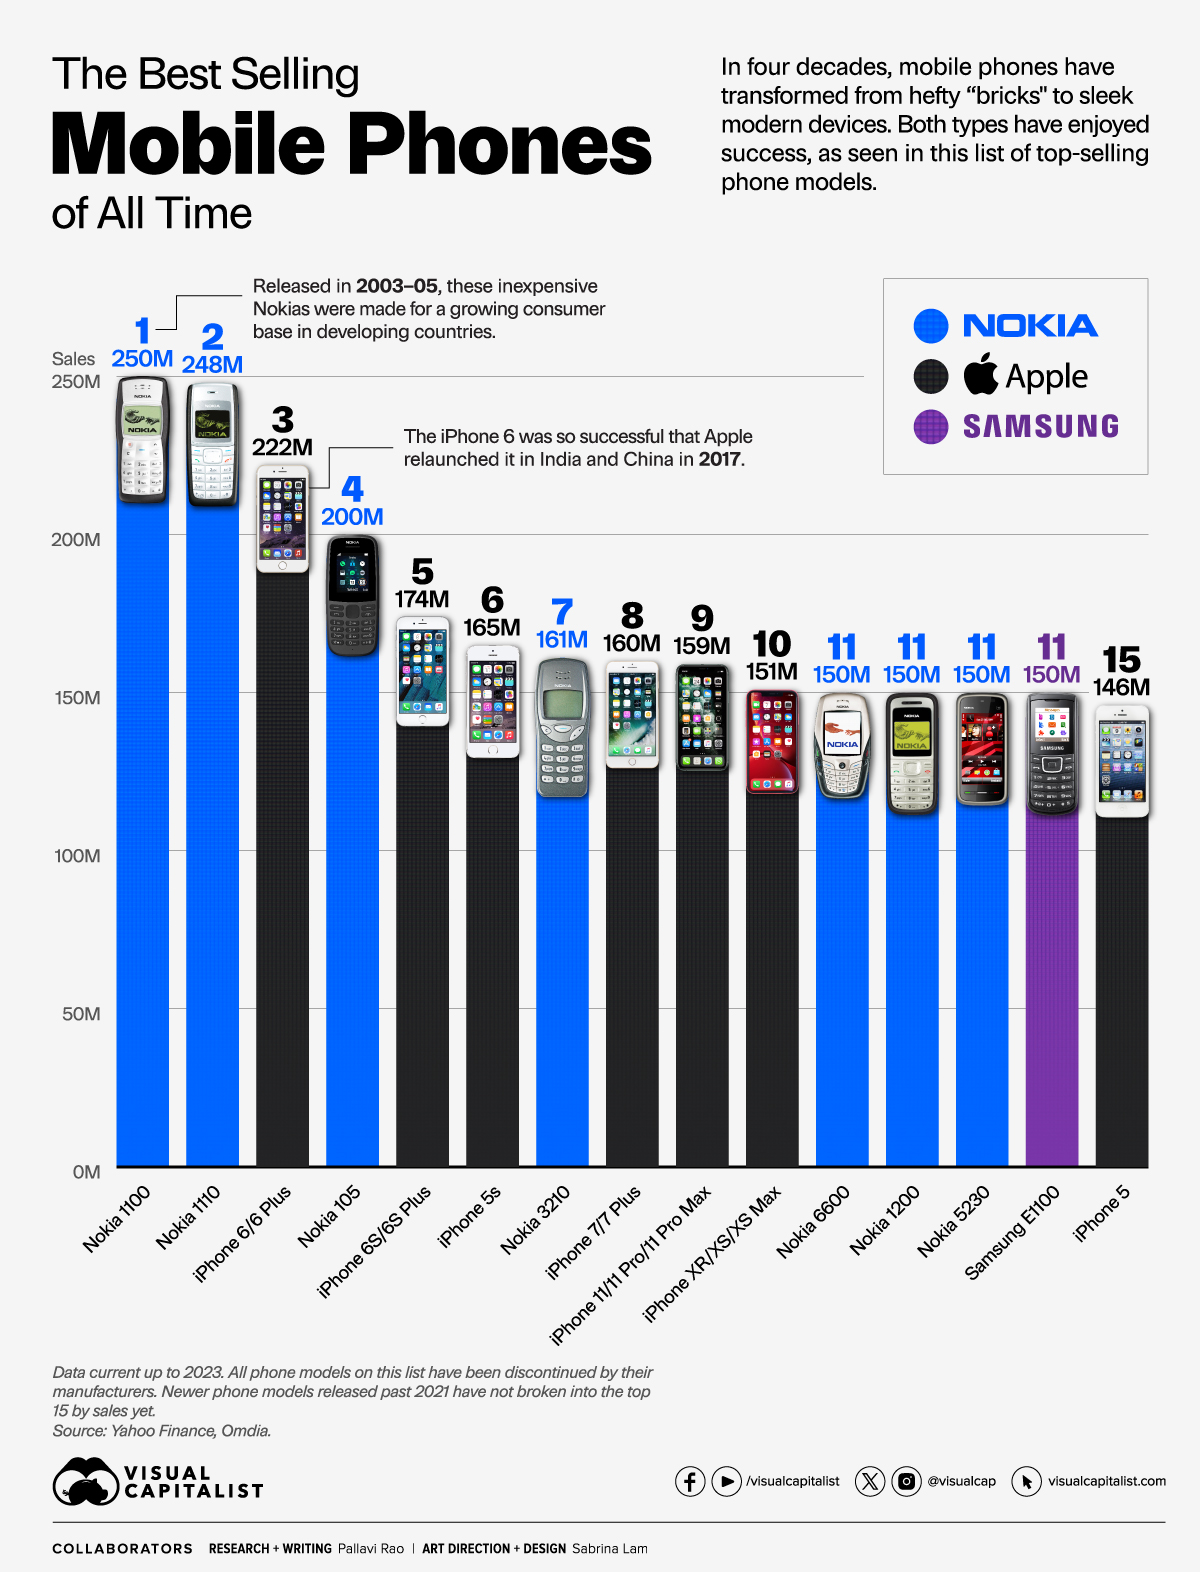  A bar chart with the sales of the top 15 most-sold mobile phones of all time. 